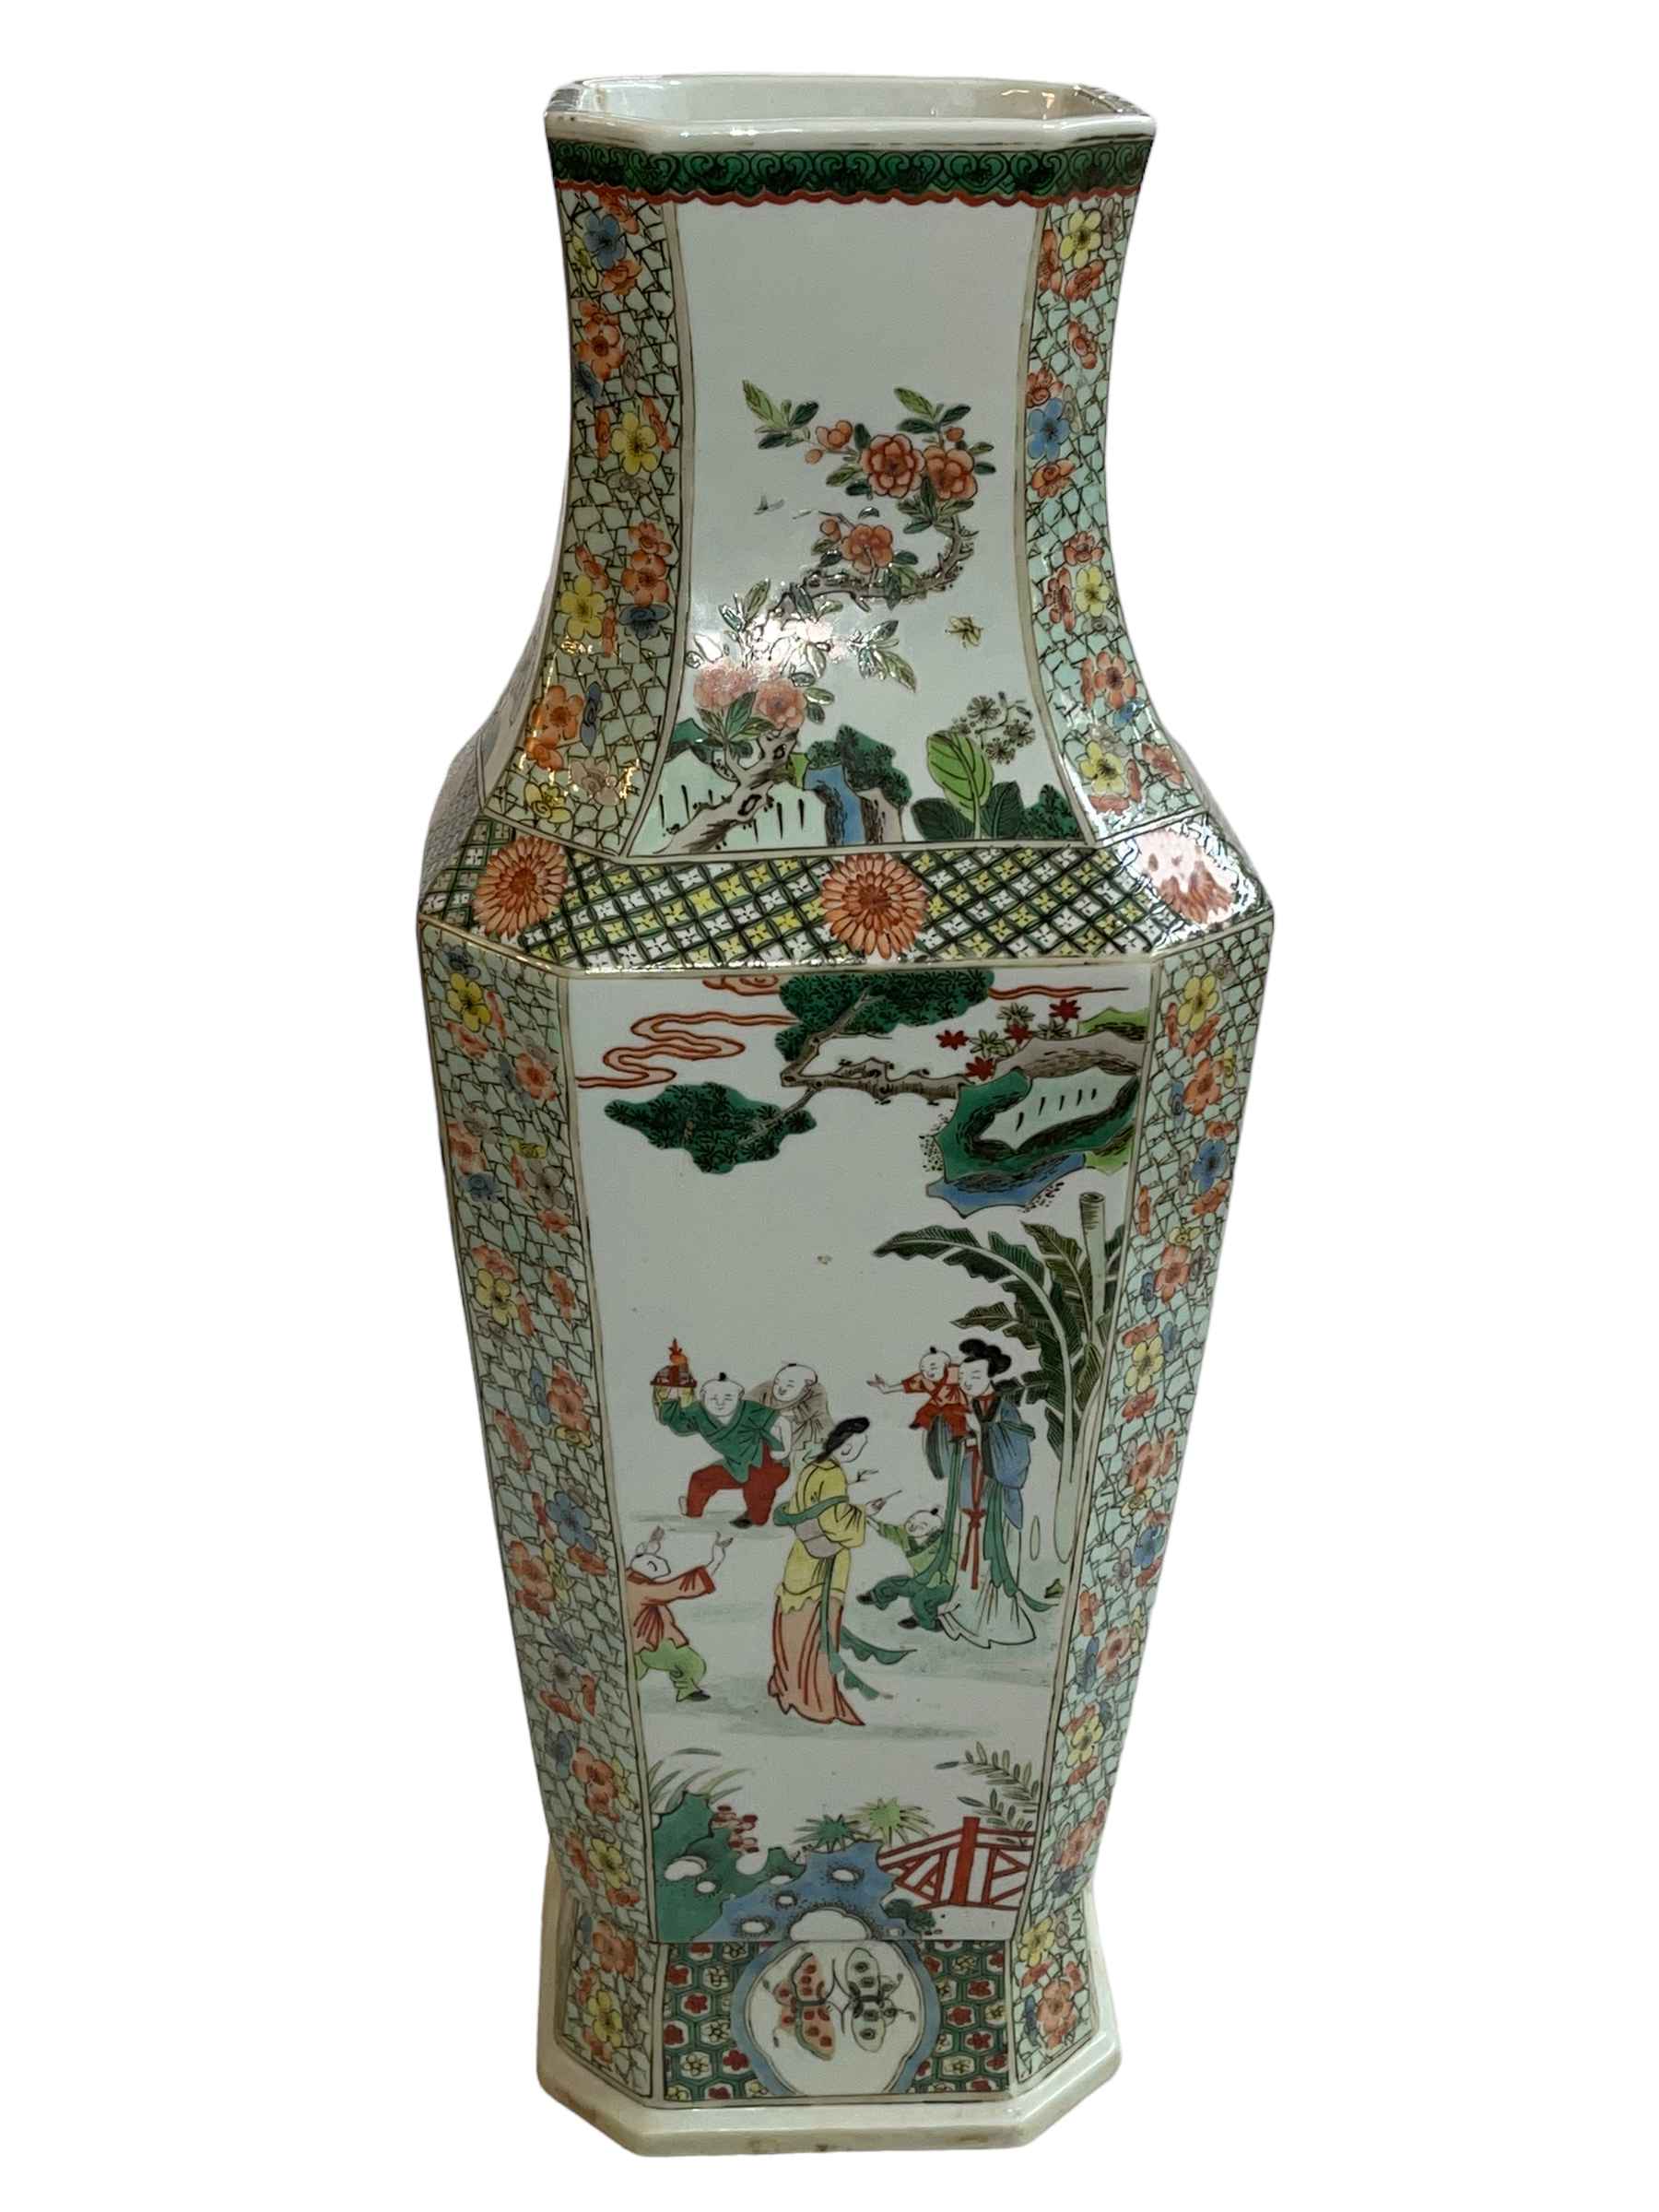 Large Chinese vase decorated with figures in landscape, birds on branch, - Image 2 of 5